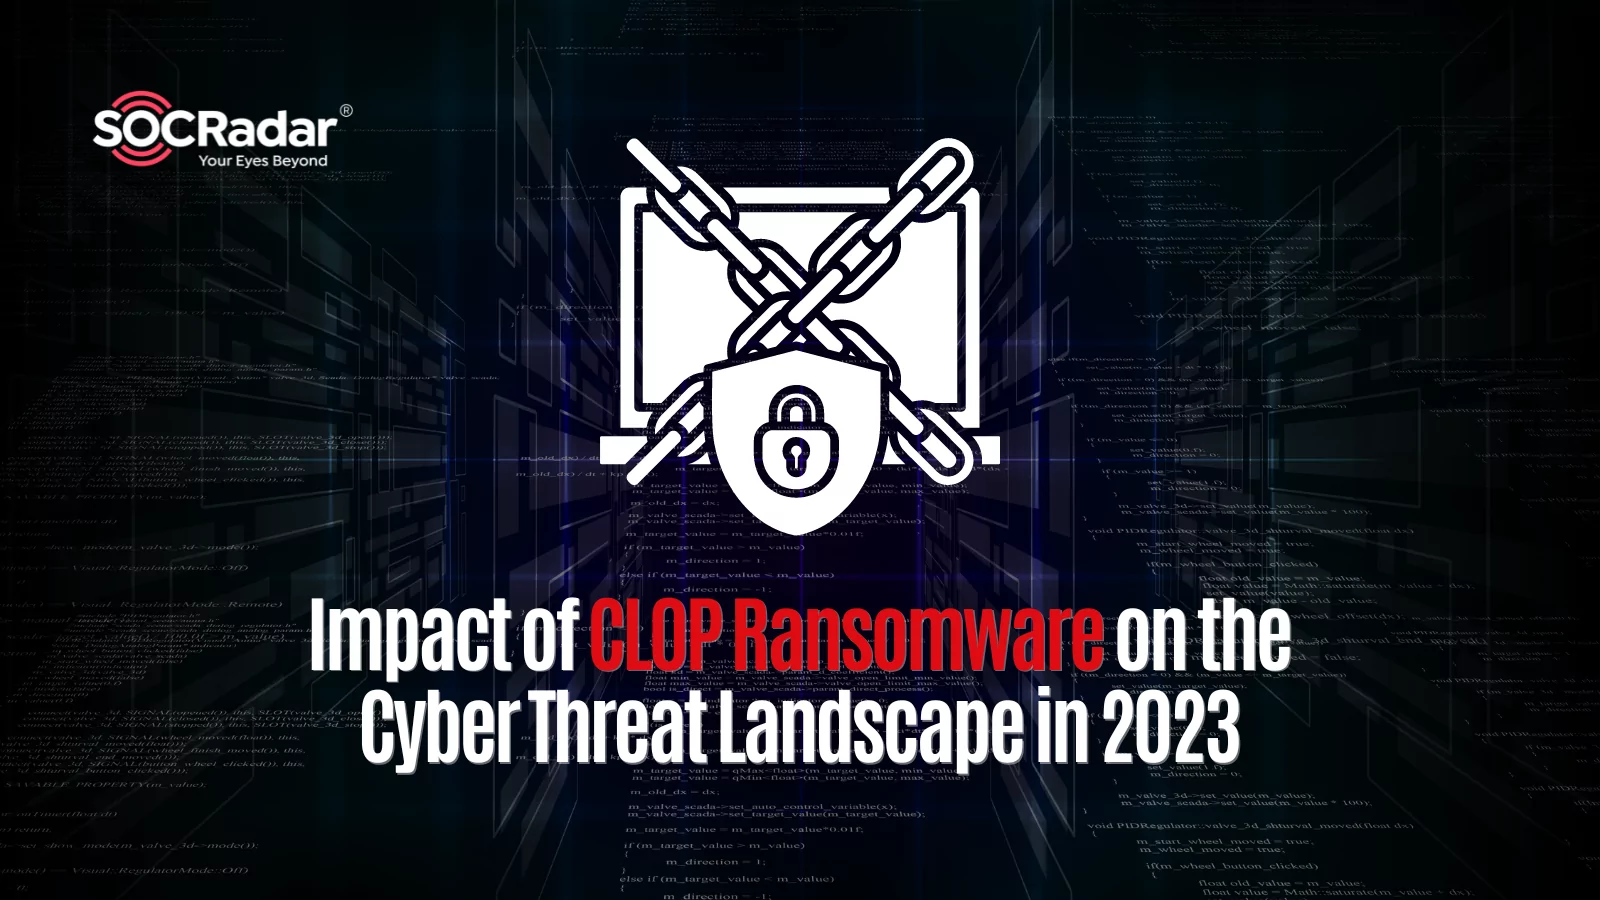 SOCRadar® Cyber Intelligence Inc. | Impact of CL0P Ransomware on the Cyber Threat Landscape in 2023: An Analysis of Cyber Tactics and Threat Evolution Over the Year